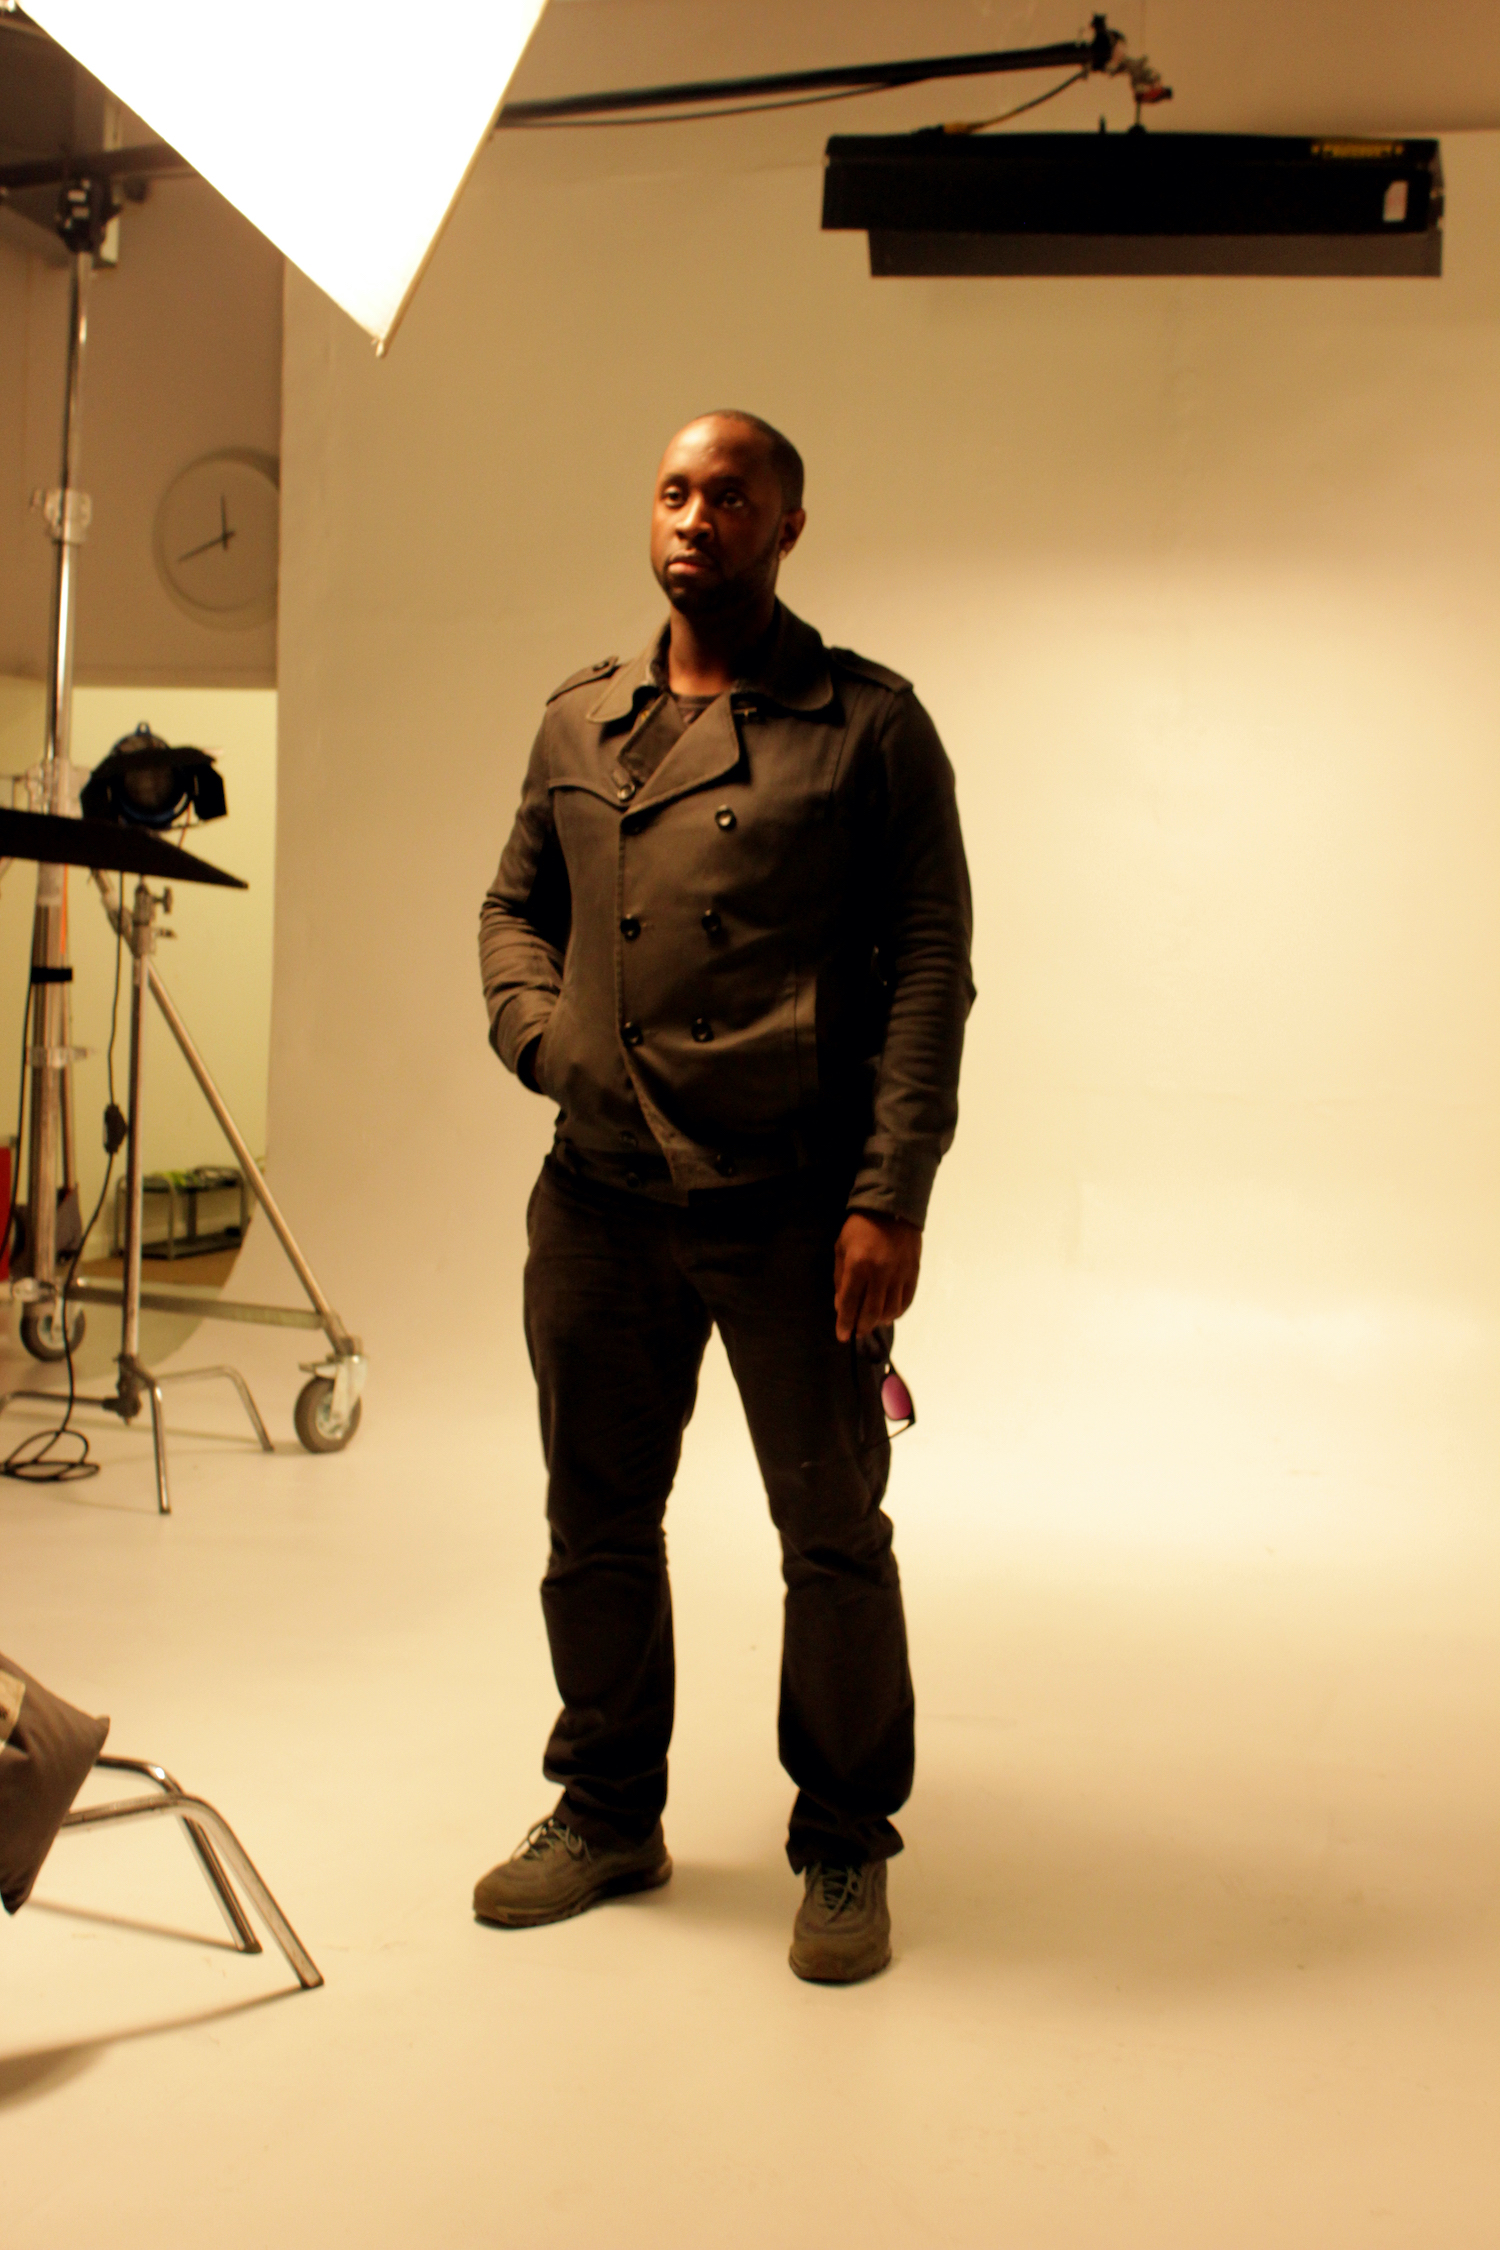 Professional Photography Closeup Of Black Man In Khaki Suite Standing On White Studio Backdrop With Lighting Stands